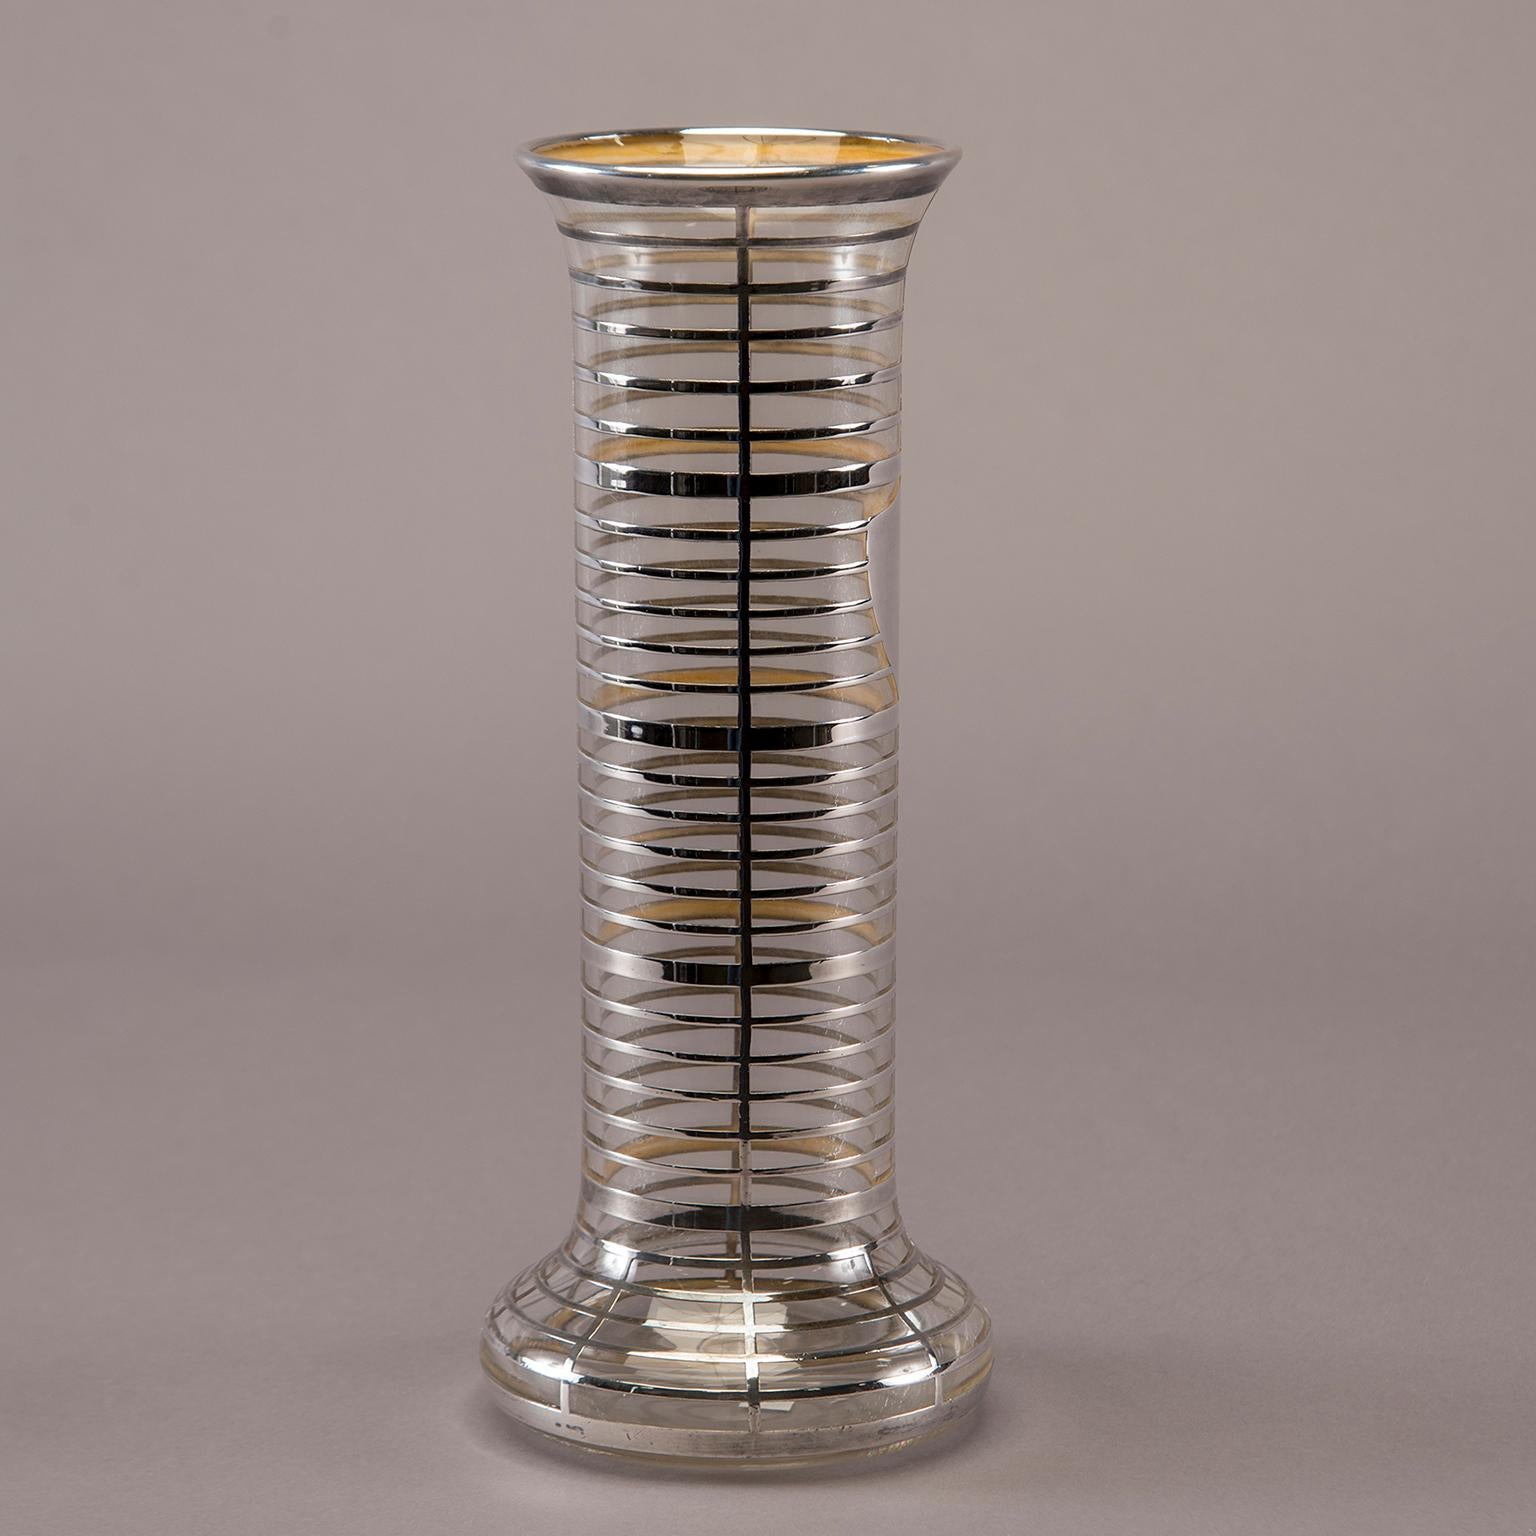 Tall clear glass vase features a wide base and heavy silver overlay in a banded grid pattern with shield form, circa 1940s. Unknown maker.